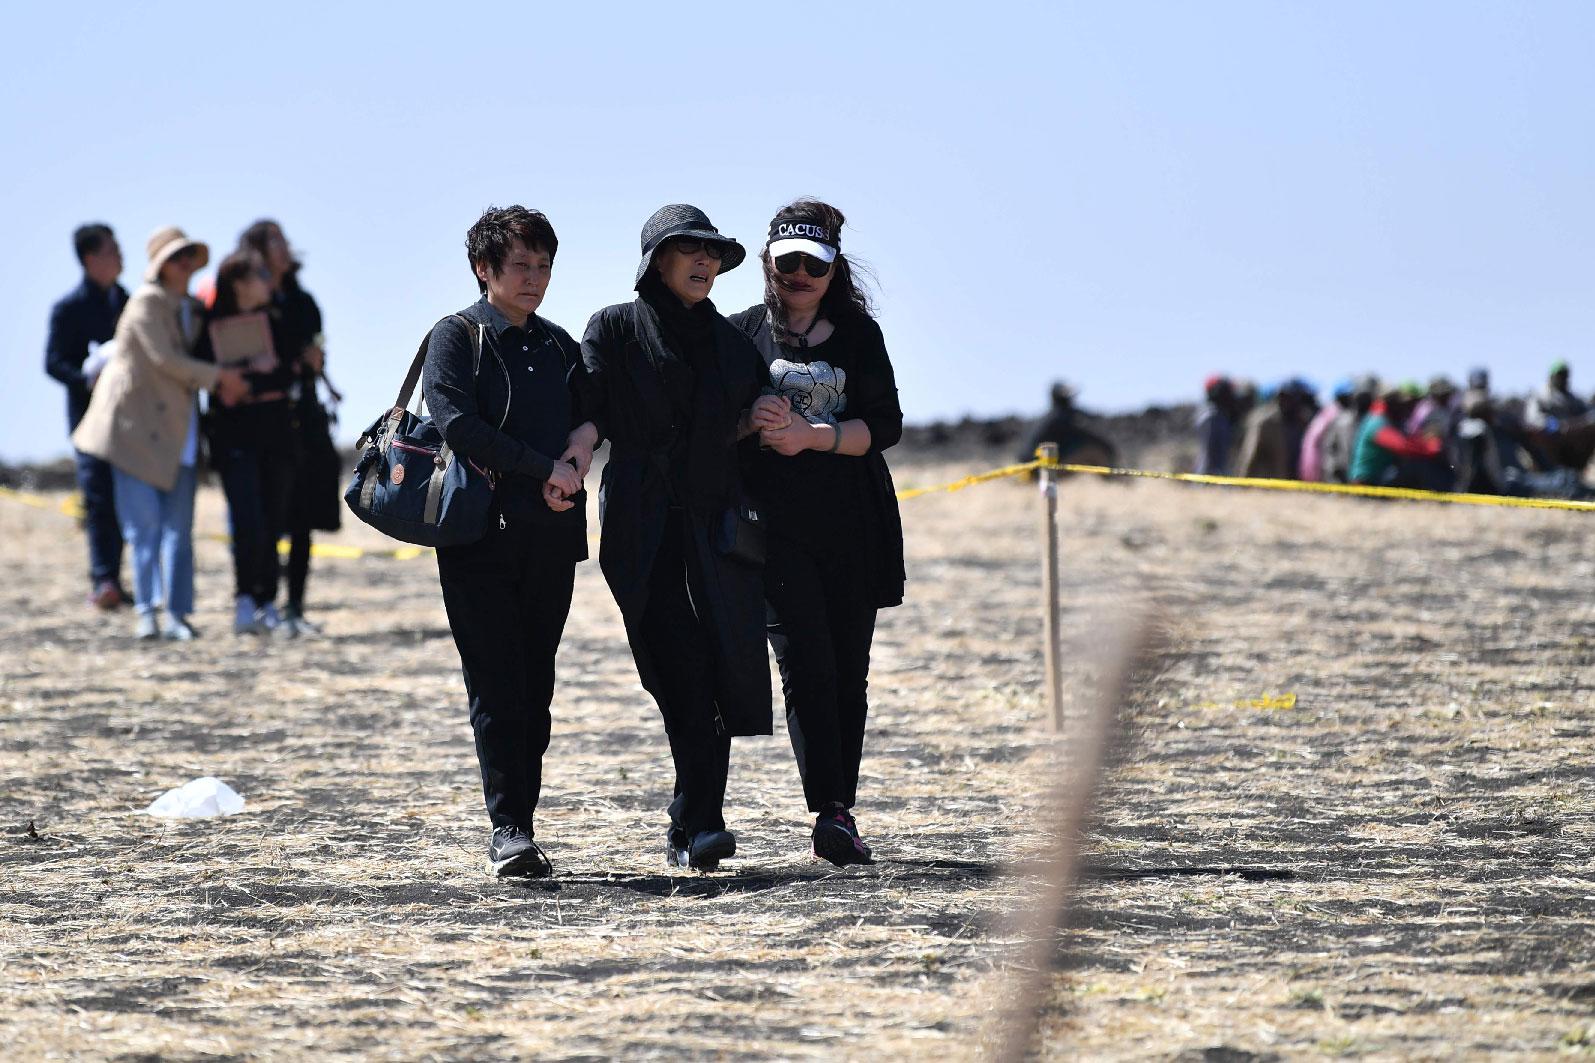 A family member of victims from China walk toward the crash site of the Ethiopian Airlines operated Boeing 737 MAX aircraft in which their relatives perished among the 157 passengers and crew onboard, at Hama Quntushele village, near Bishoftu, in Oromia region, on March 15, 2019.